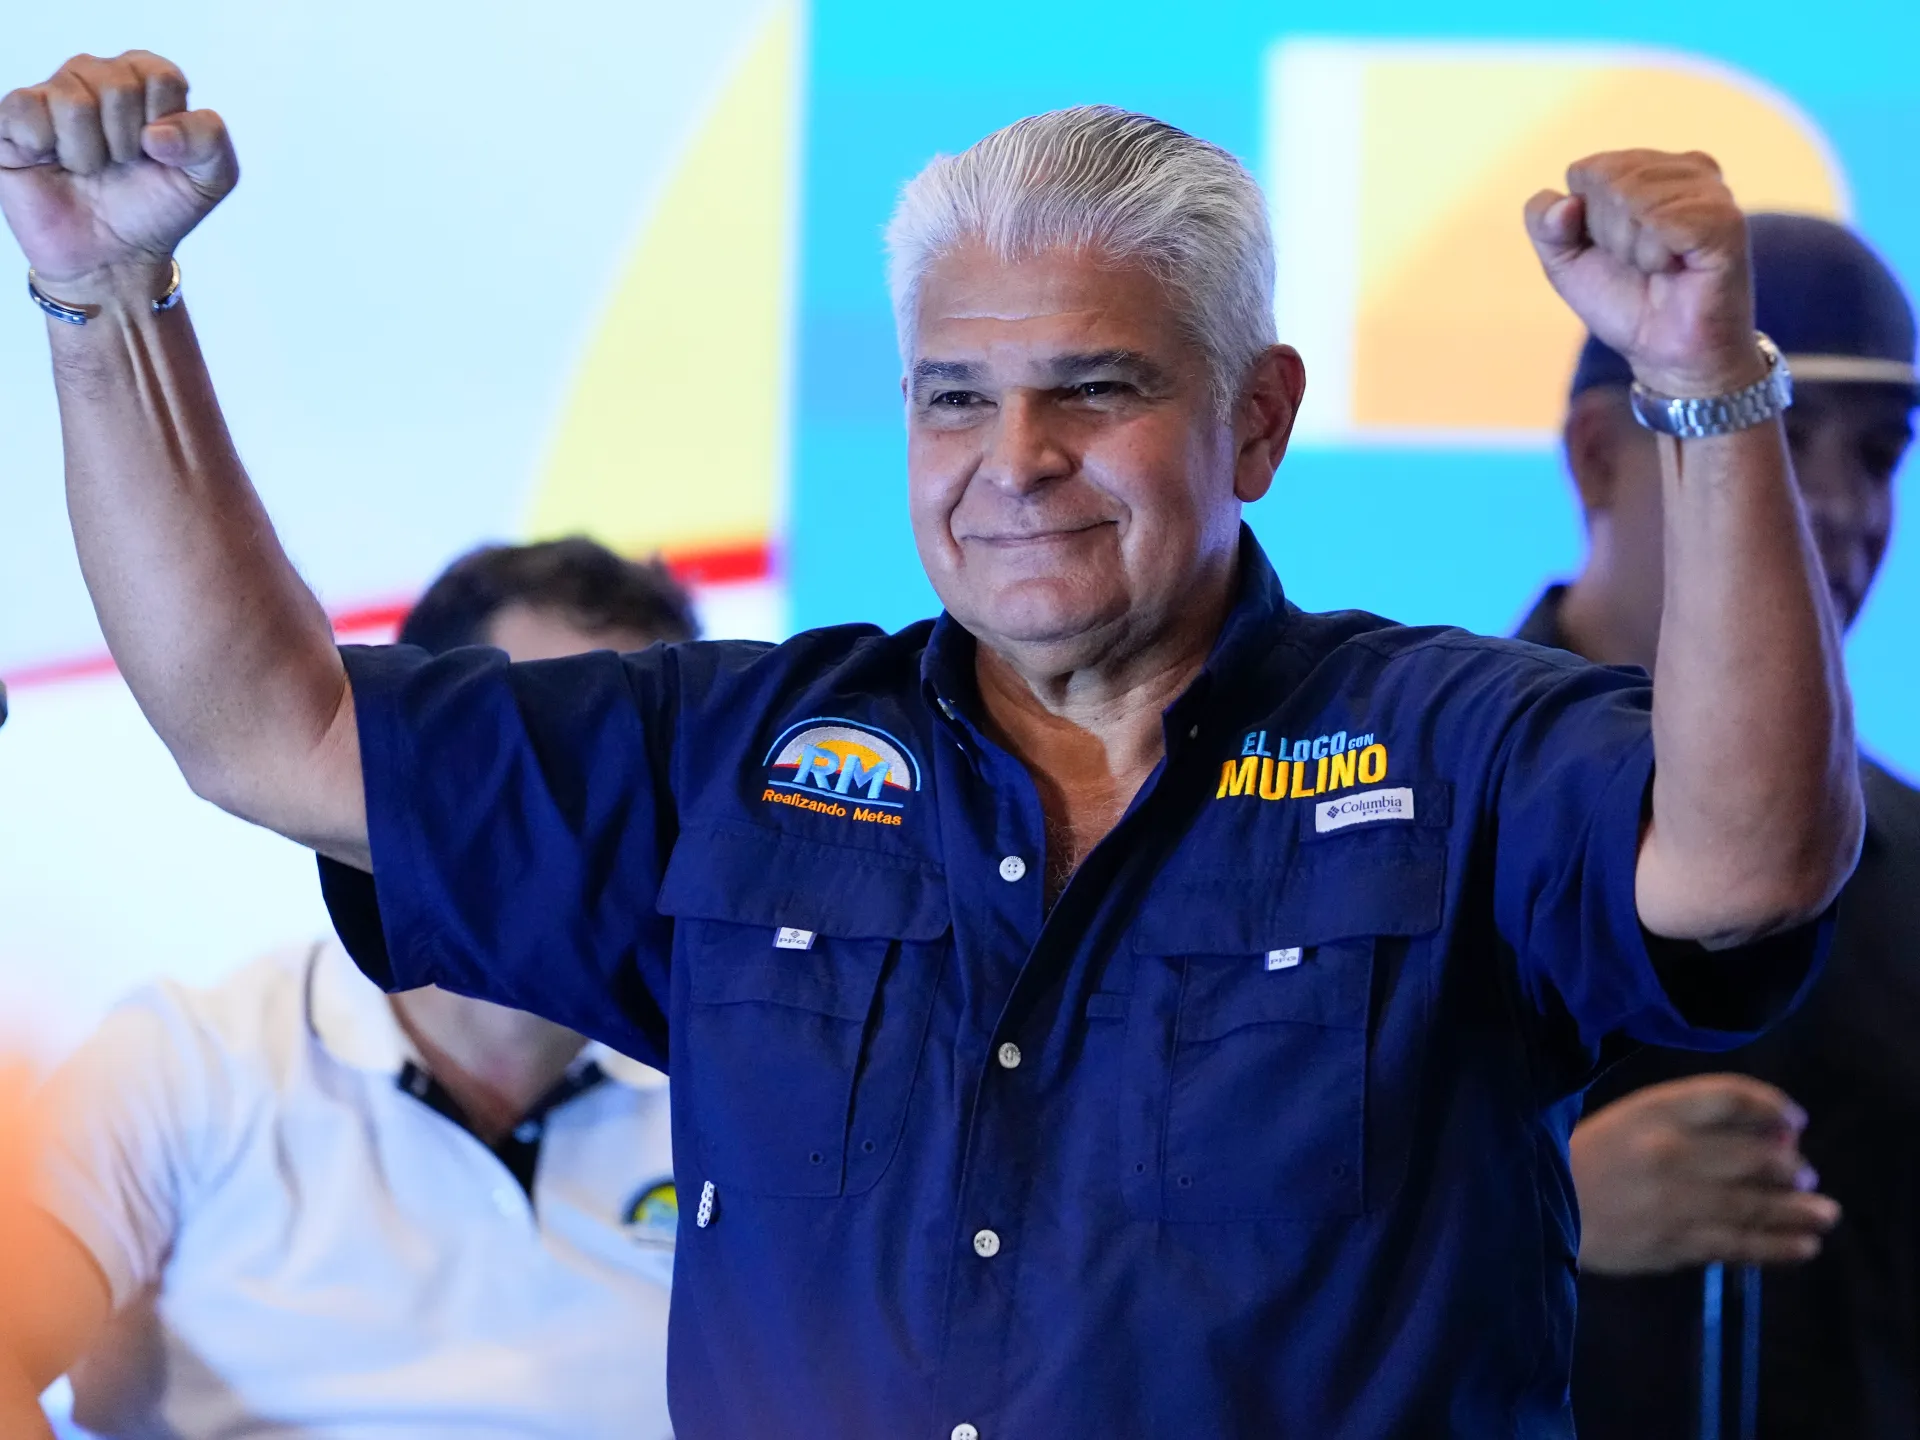 Stand-in for convicted candidate wins Panama presidency